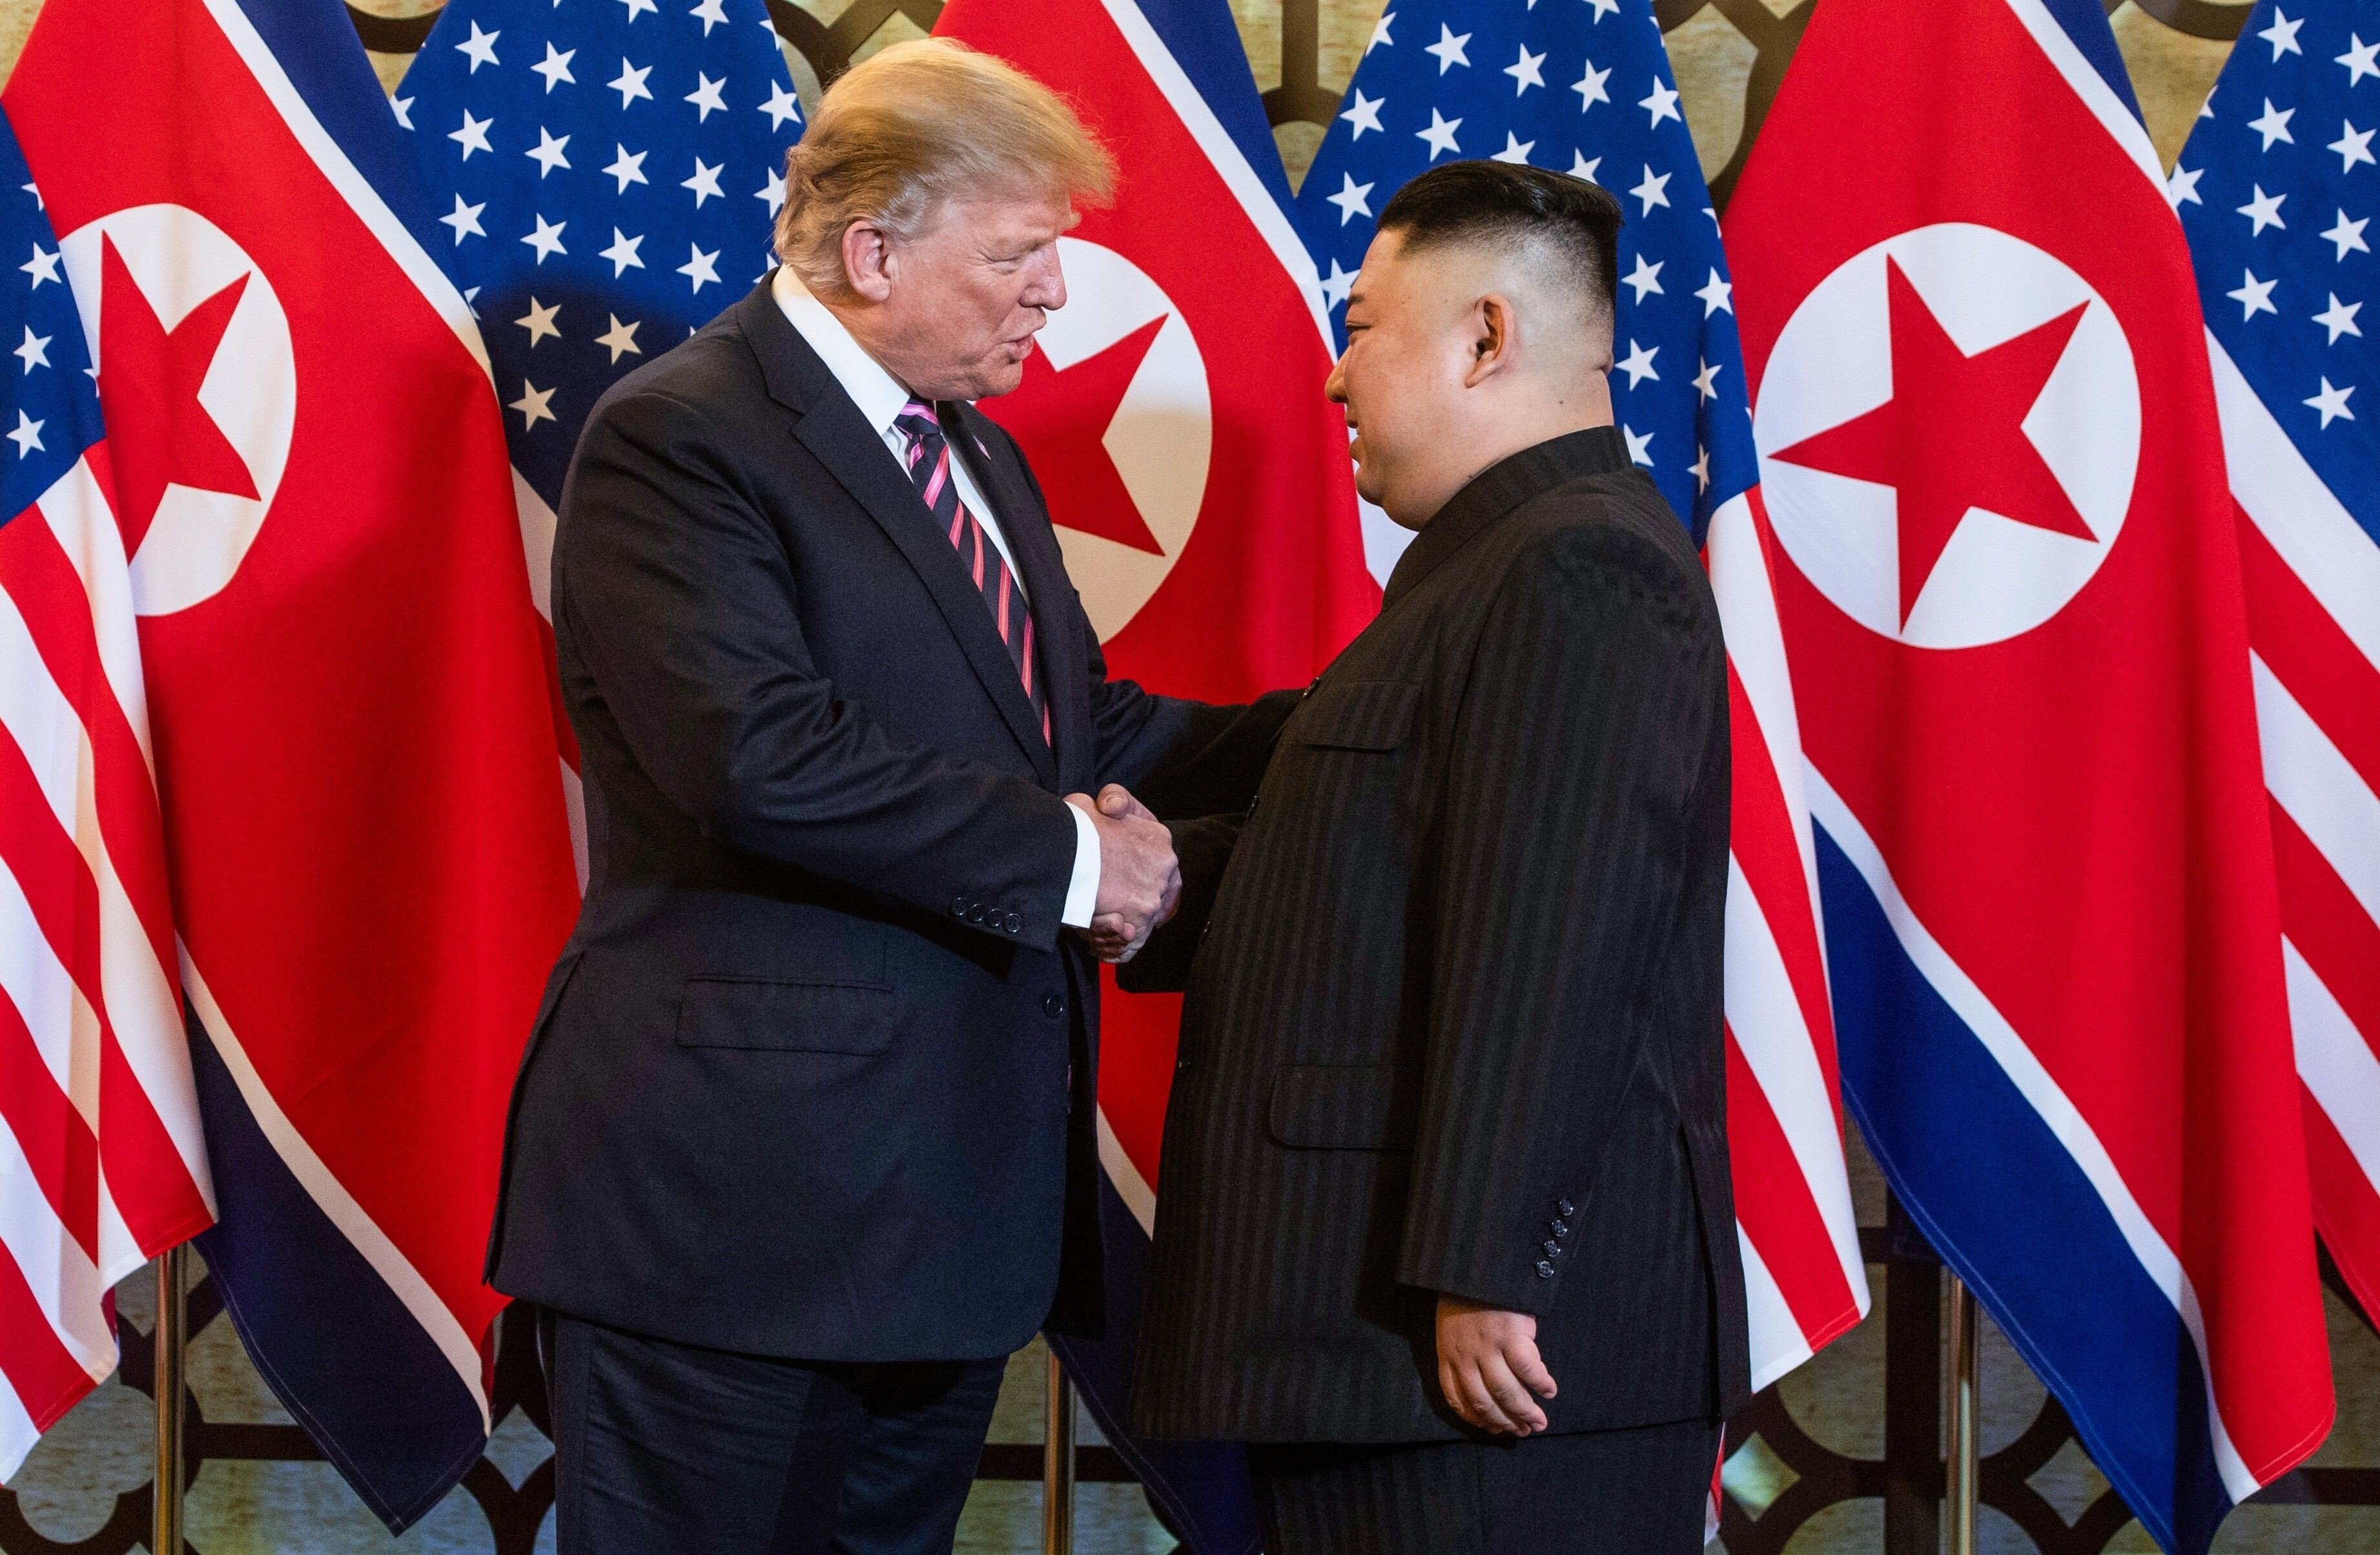 US President Donald Trump shakes hands with North Korea's leader Kim Jong-un before a meeting in Hanoi in 2019. Photo: AFP